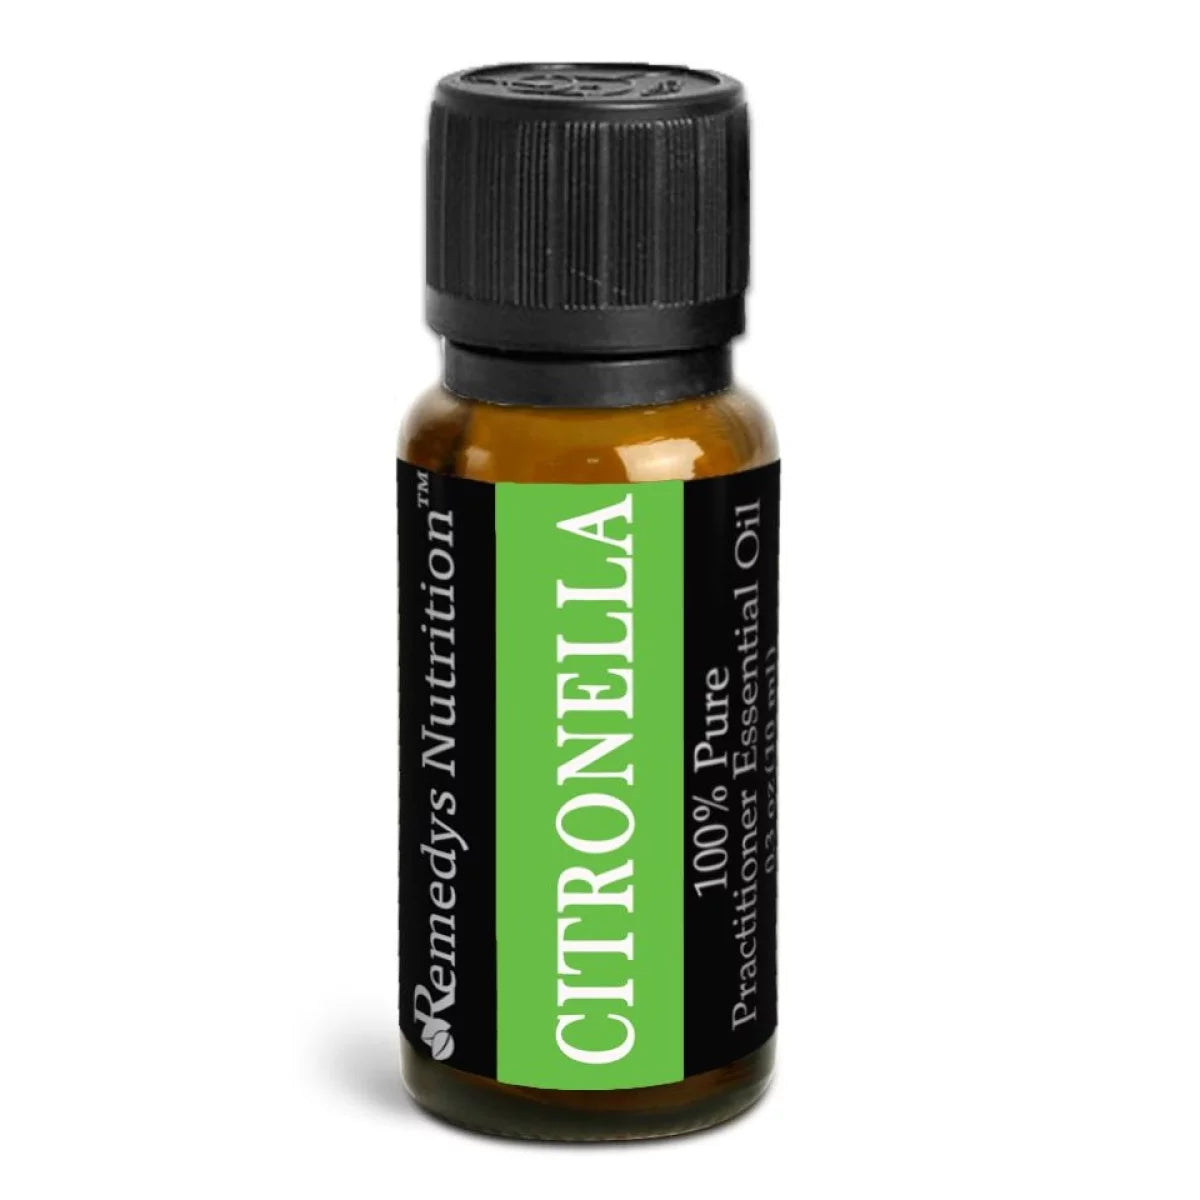 Image of Remedy's Nutrition® Citronella Essential Oil Herbal Supplement front bottle.